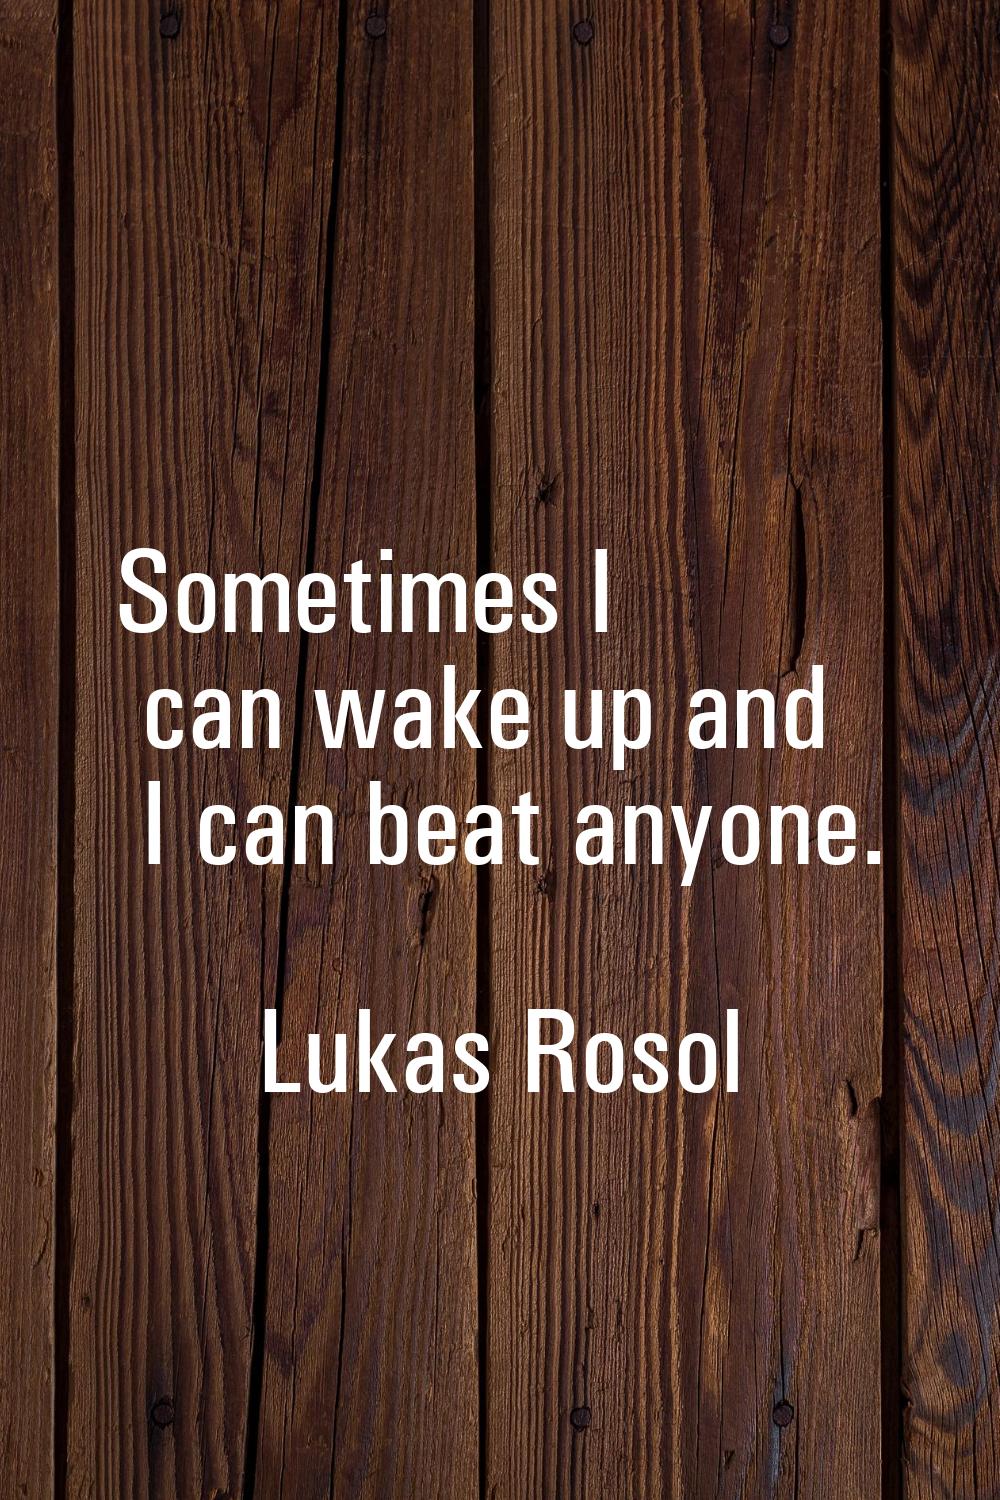 Sometimes I can wake up and I can beat anyone.